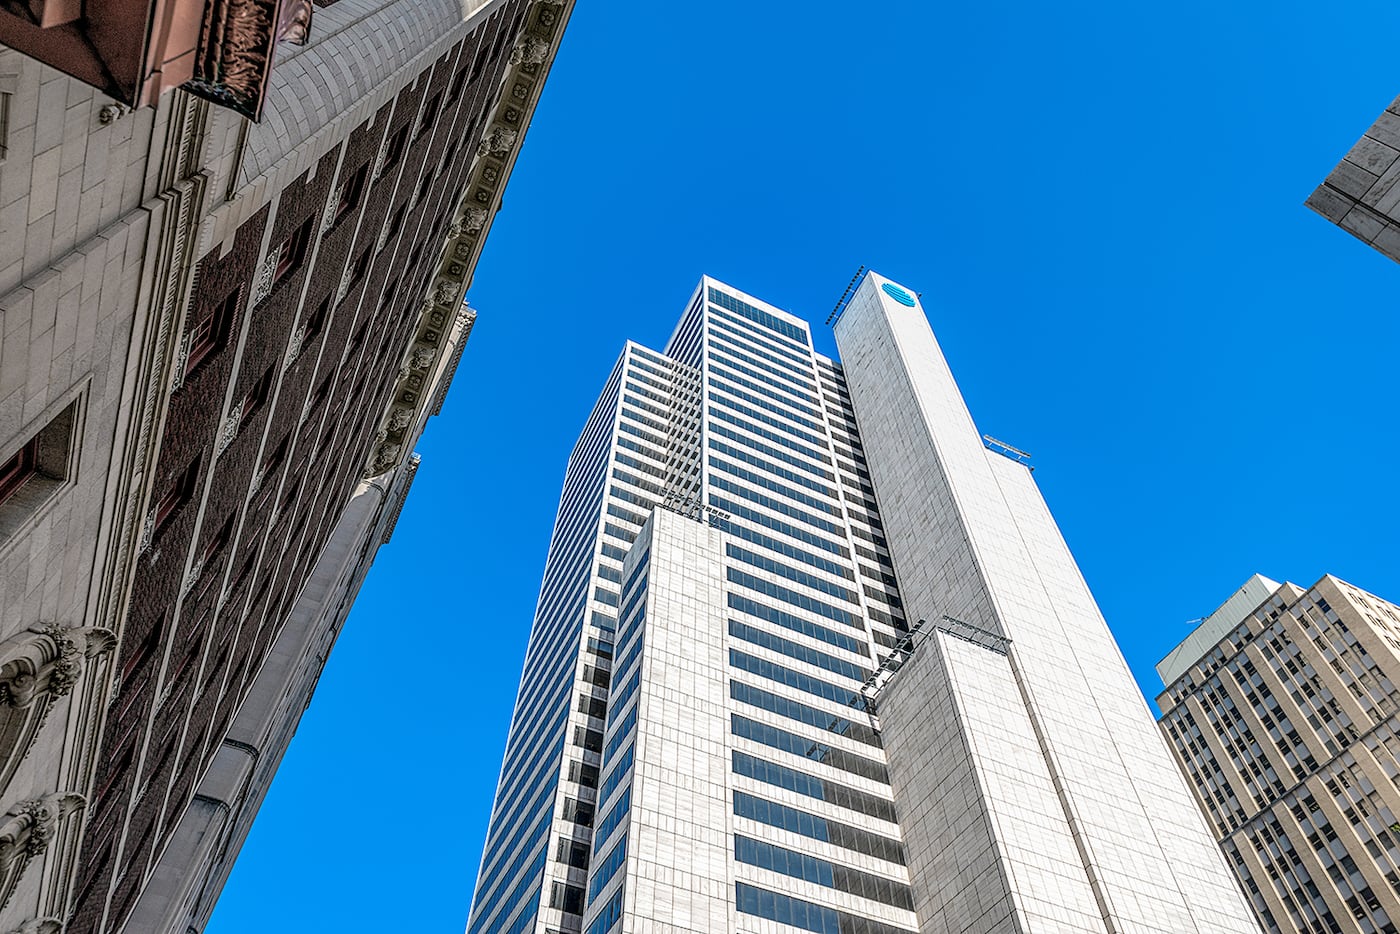 Downtown Dallas' Whitacre Tower headquarters for AT&T sold for almost $250 million.